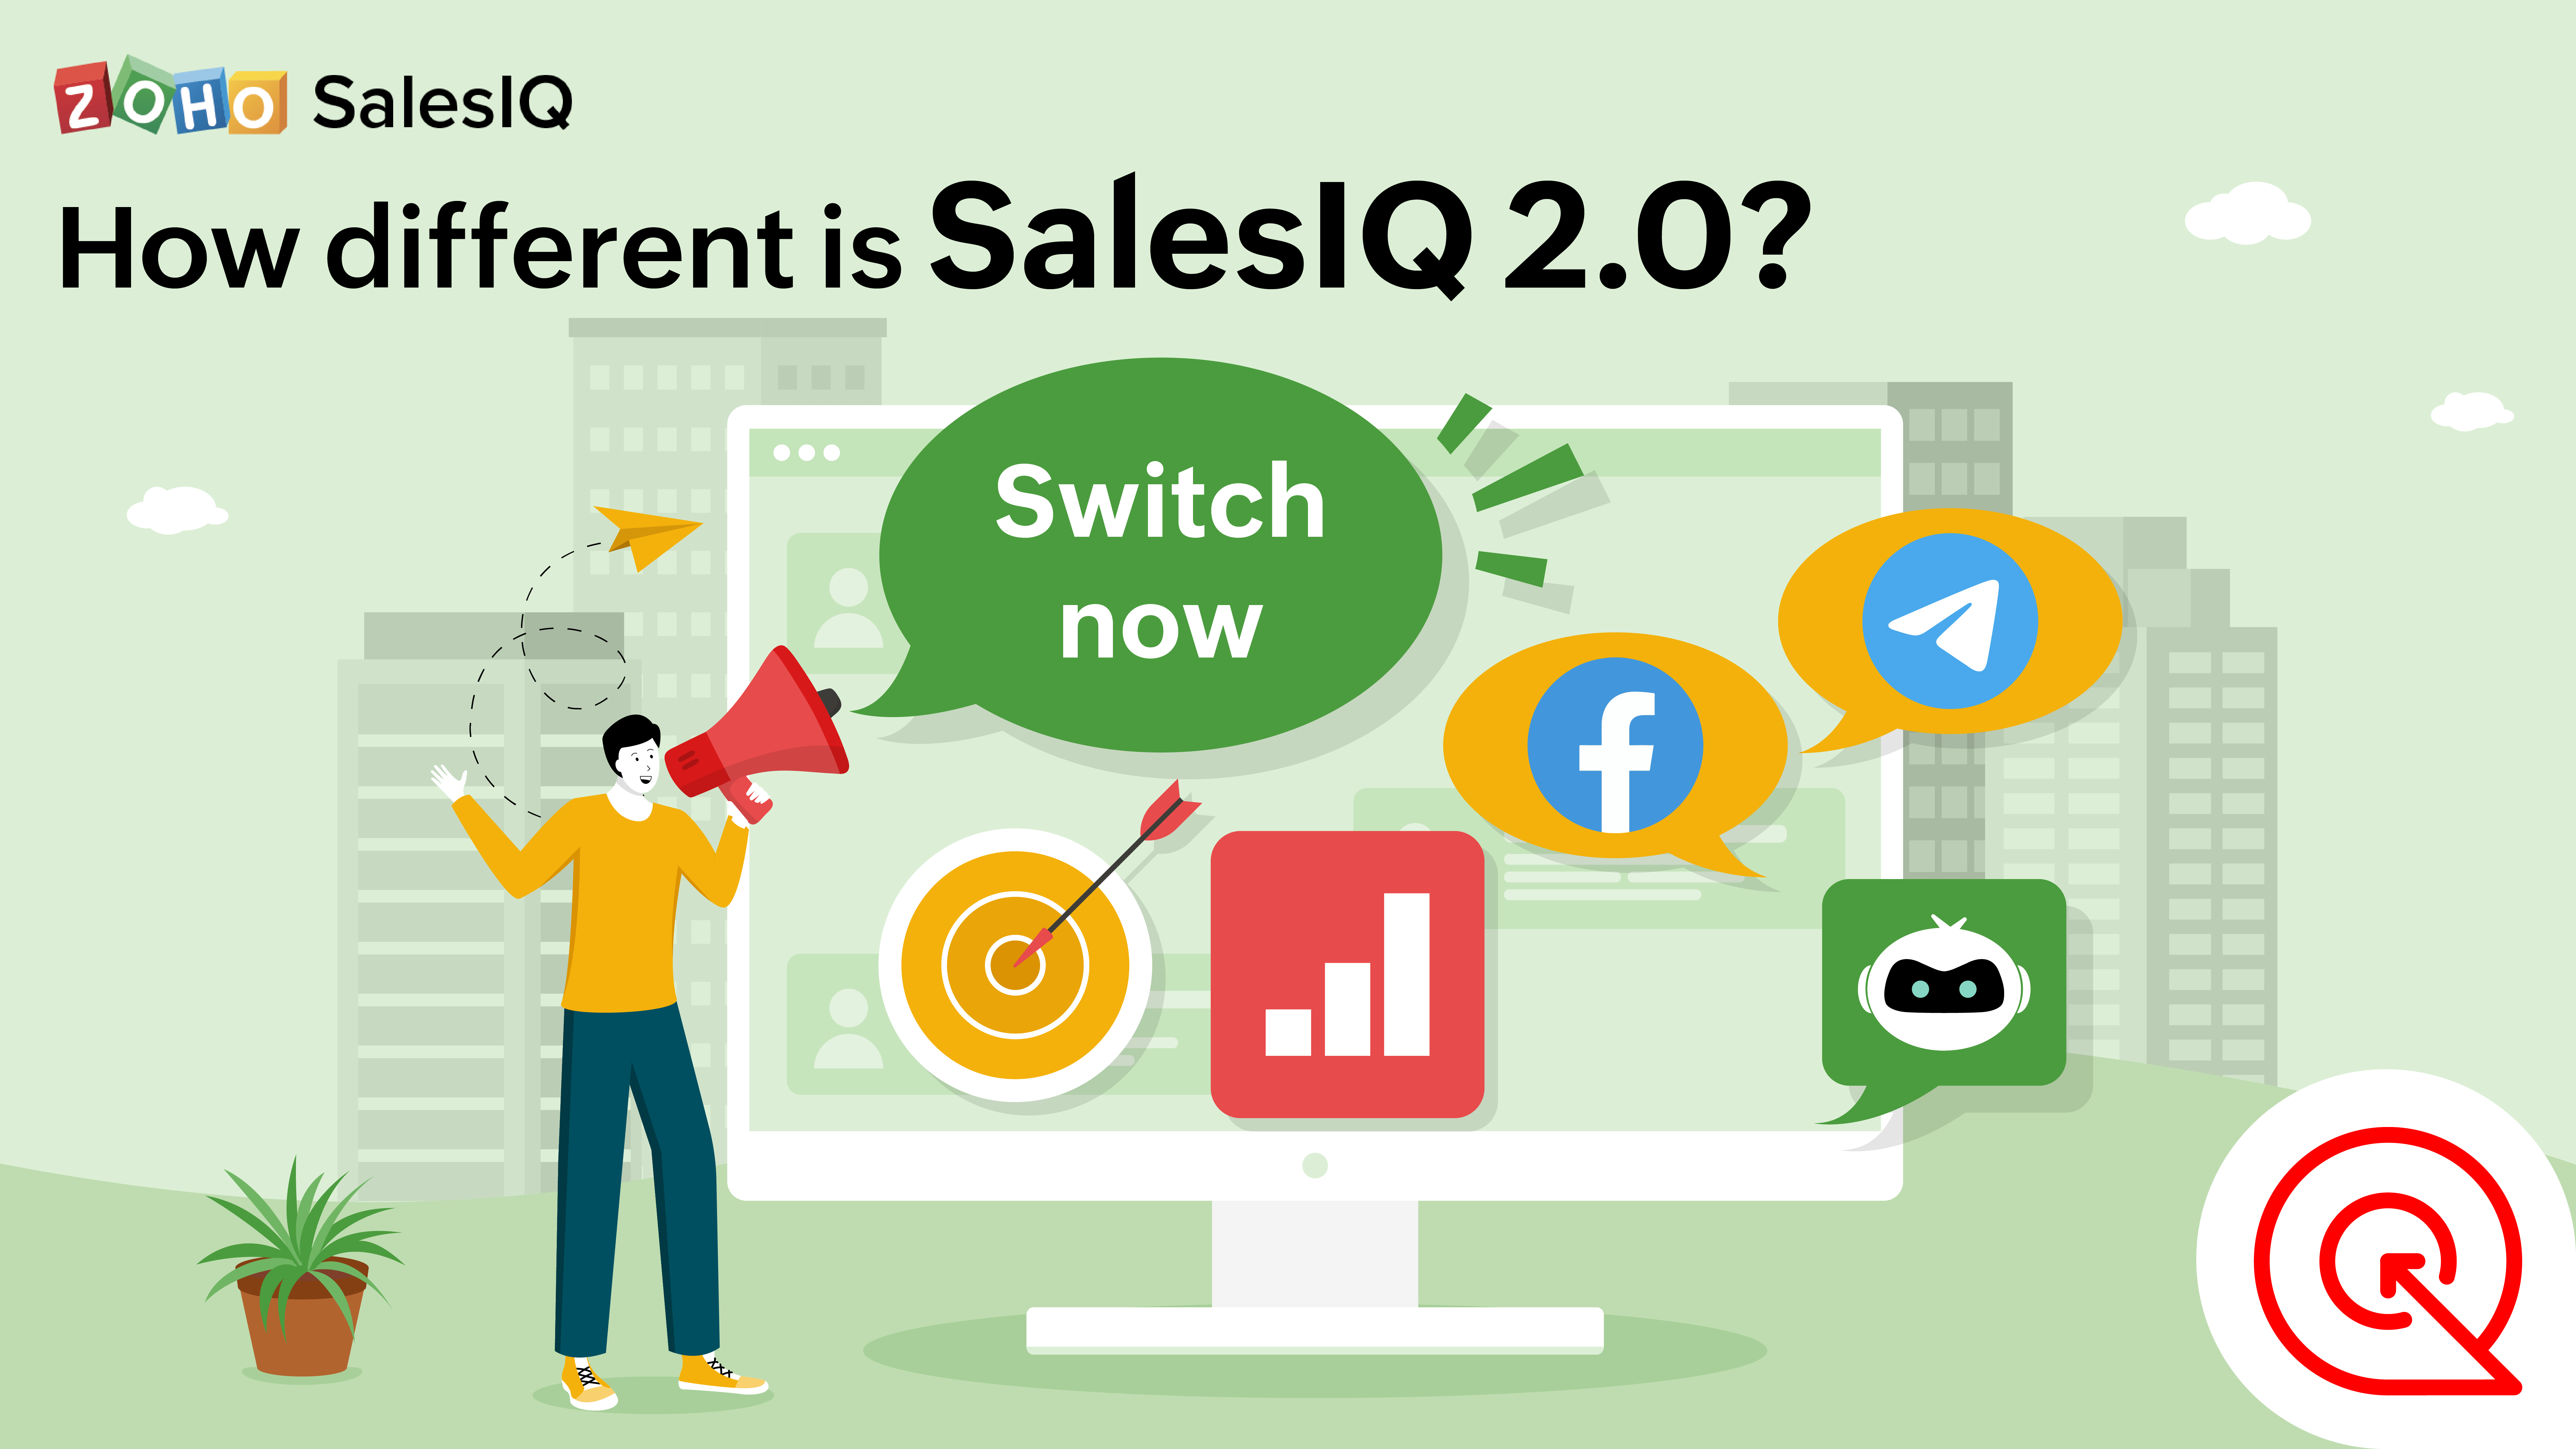 Have you moved to the new SalesIQ interface yet? Try it now!